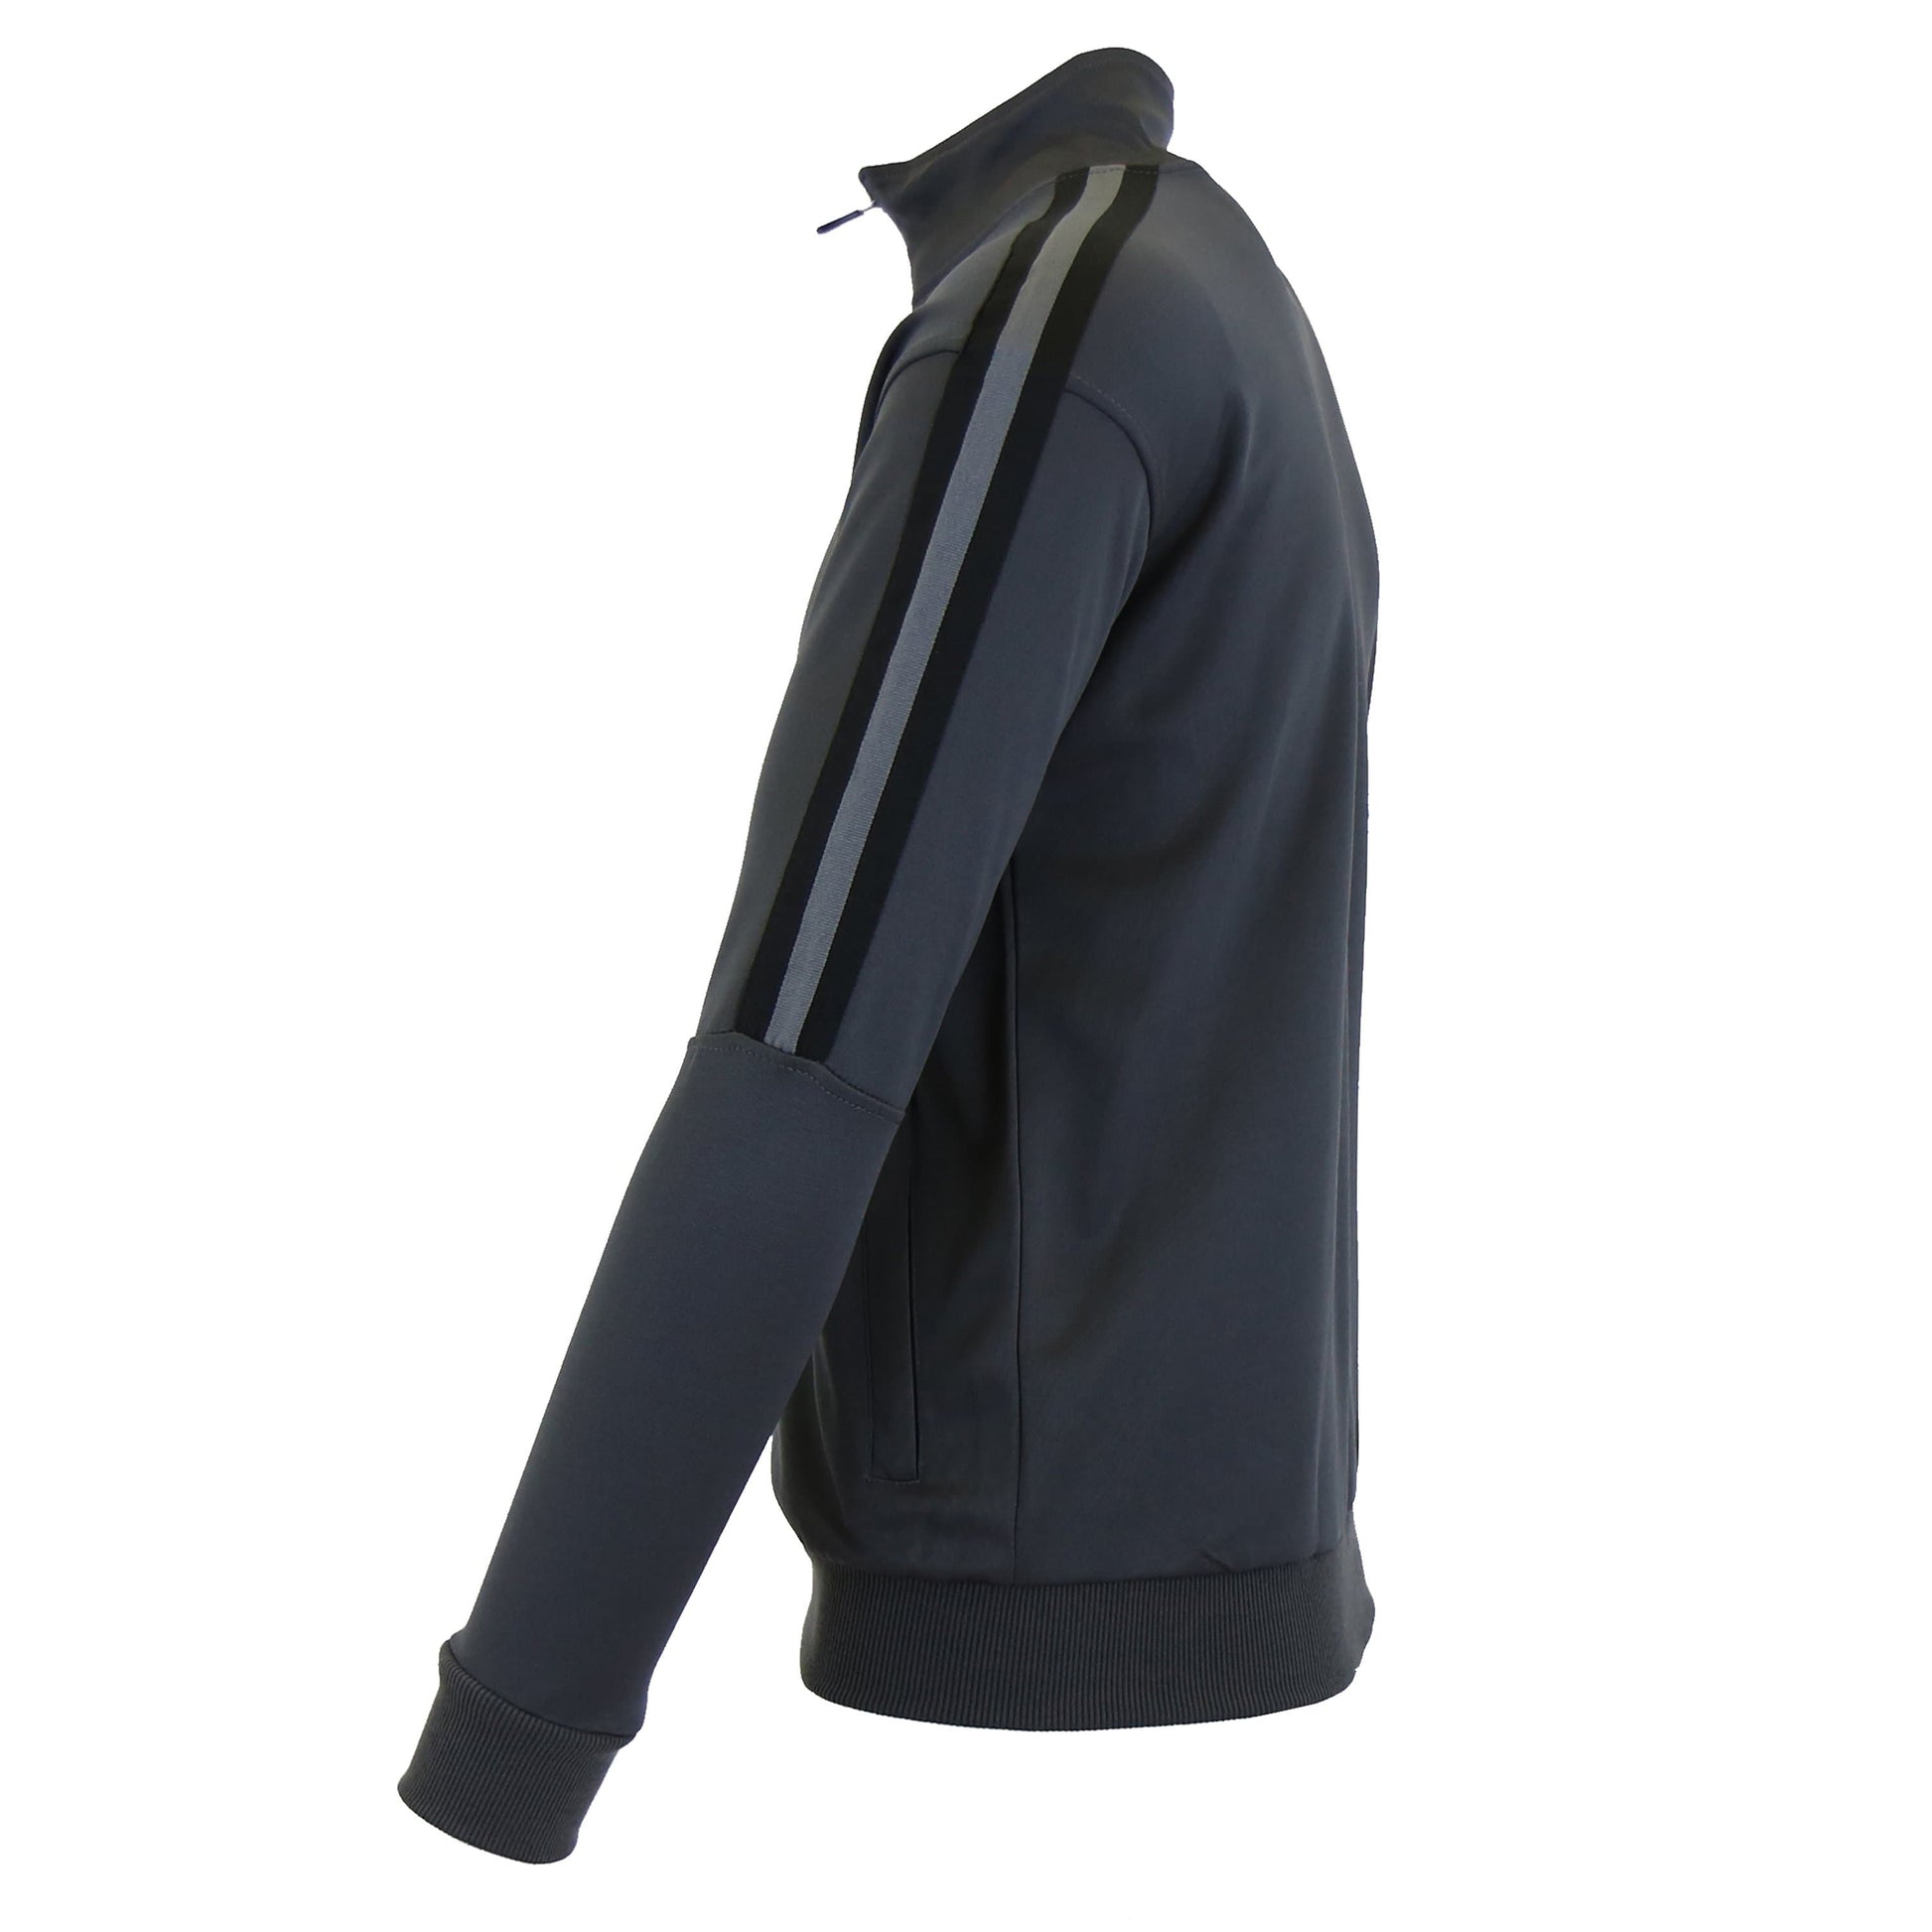 Men's Active Performance Track Jacket - GalaxybyHarvic